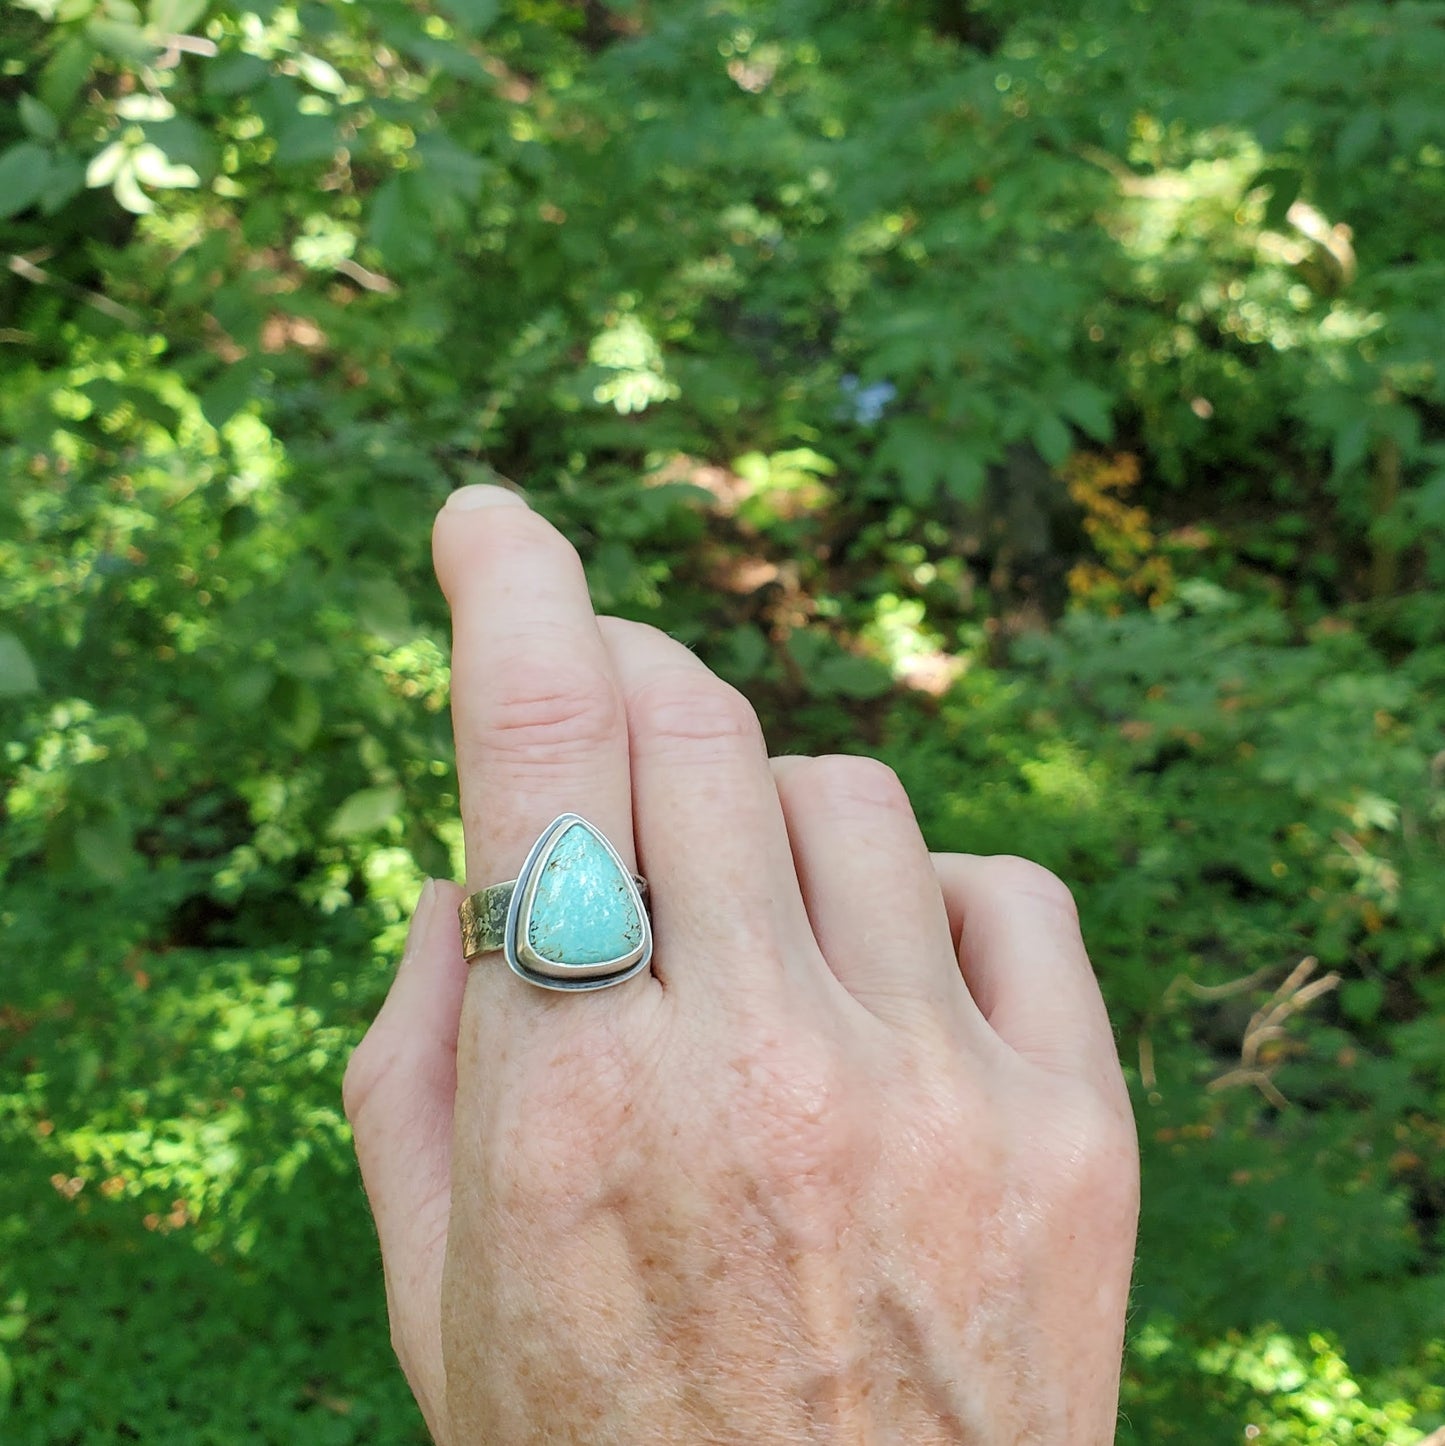 Number 8 Mine Turquoise Ring with Fused Silver Band - Size 9.25